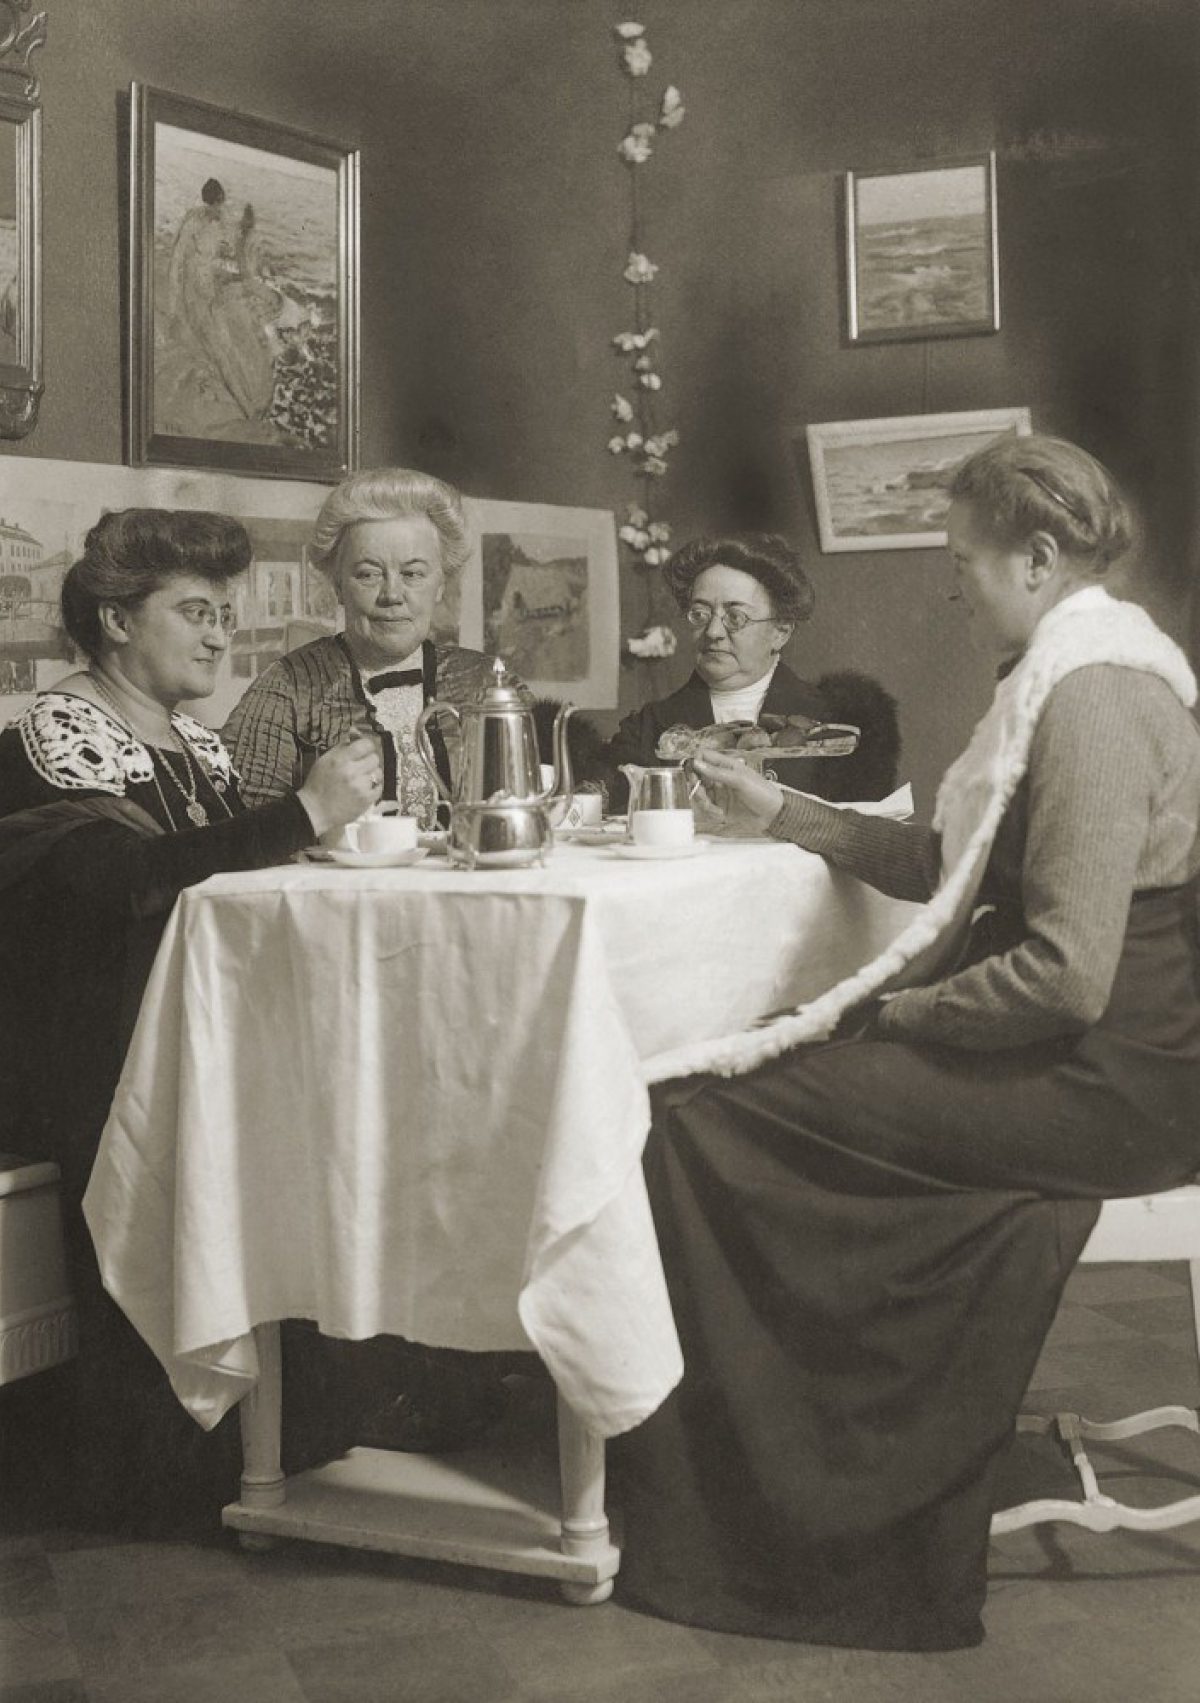 Coffee with friends: (from left) Rosika Schwimmer, Annie Furuhjelm, Lilly Krogius and Jenny af Forselles. Artur Faltin / Finnish Heritage Agency's picture collections